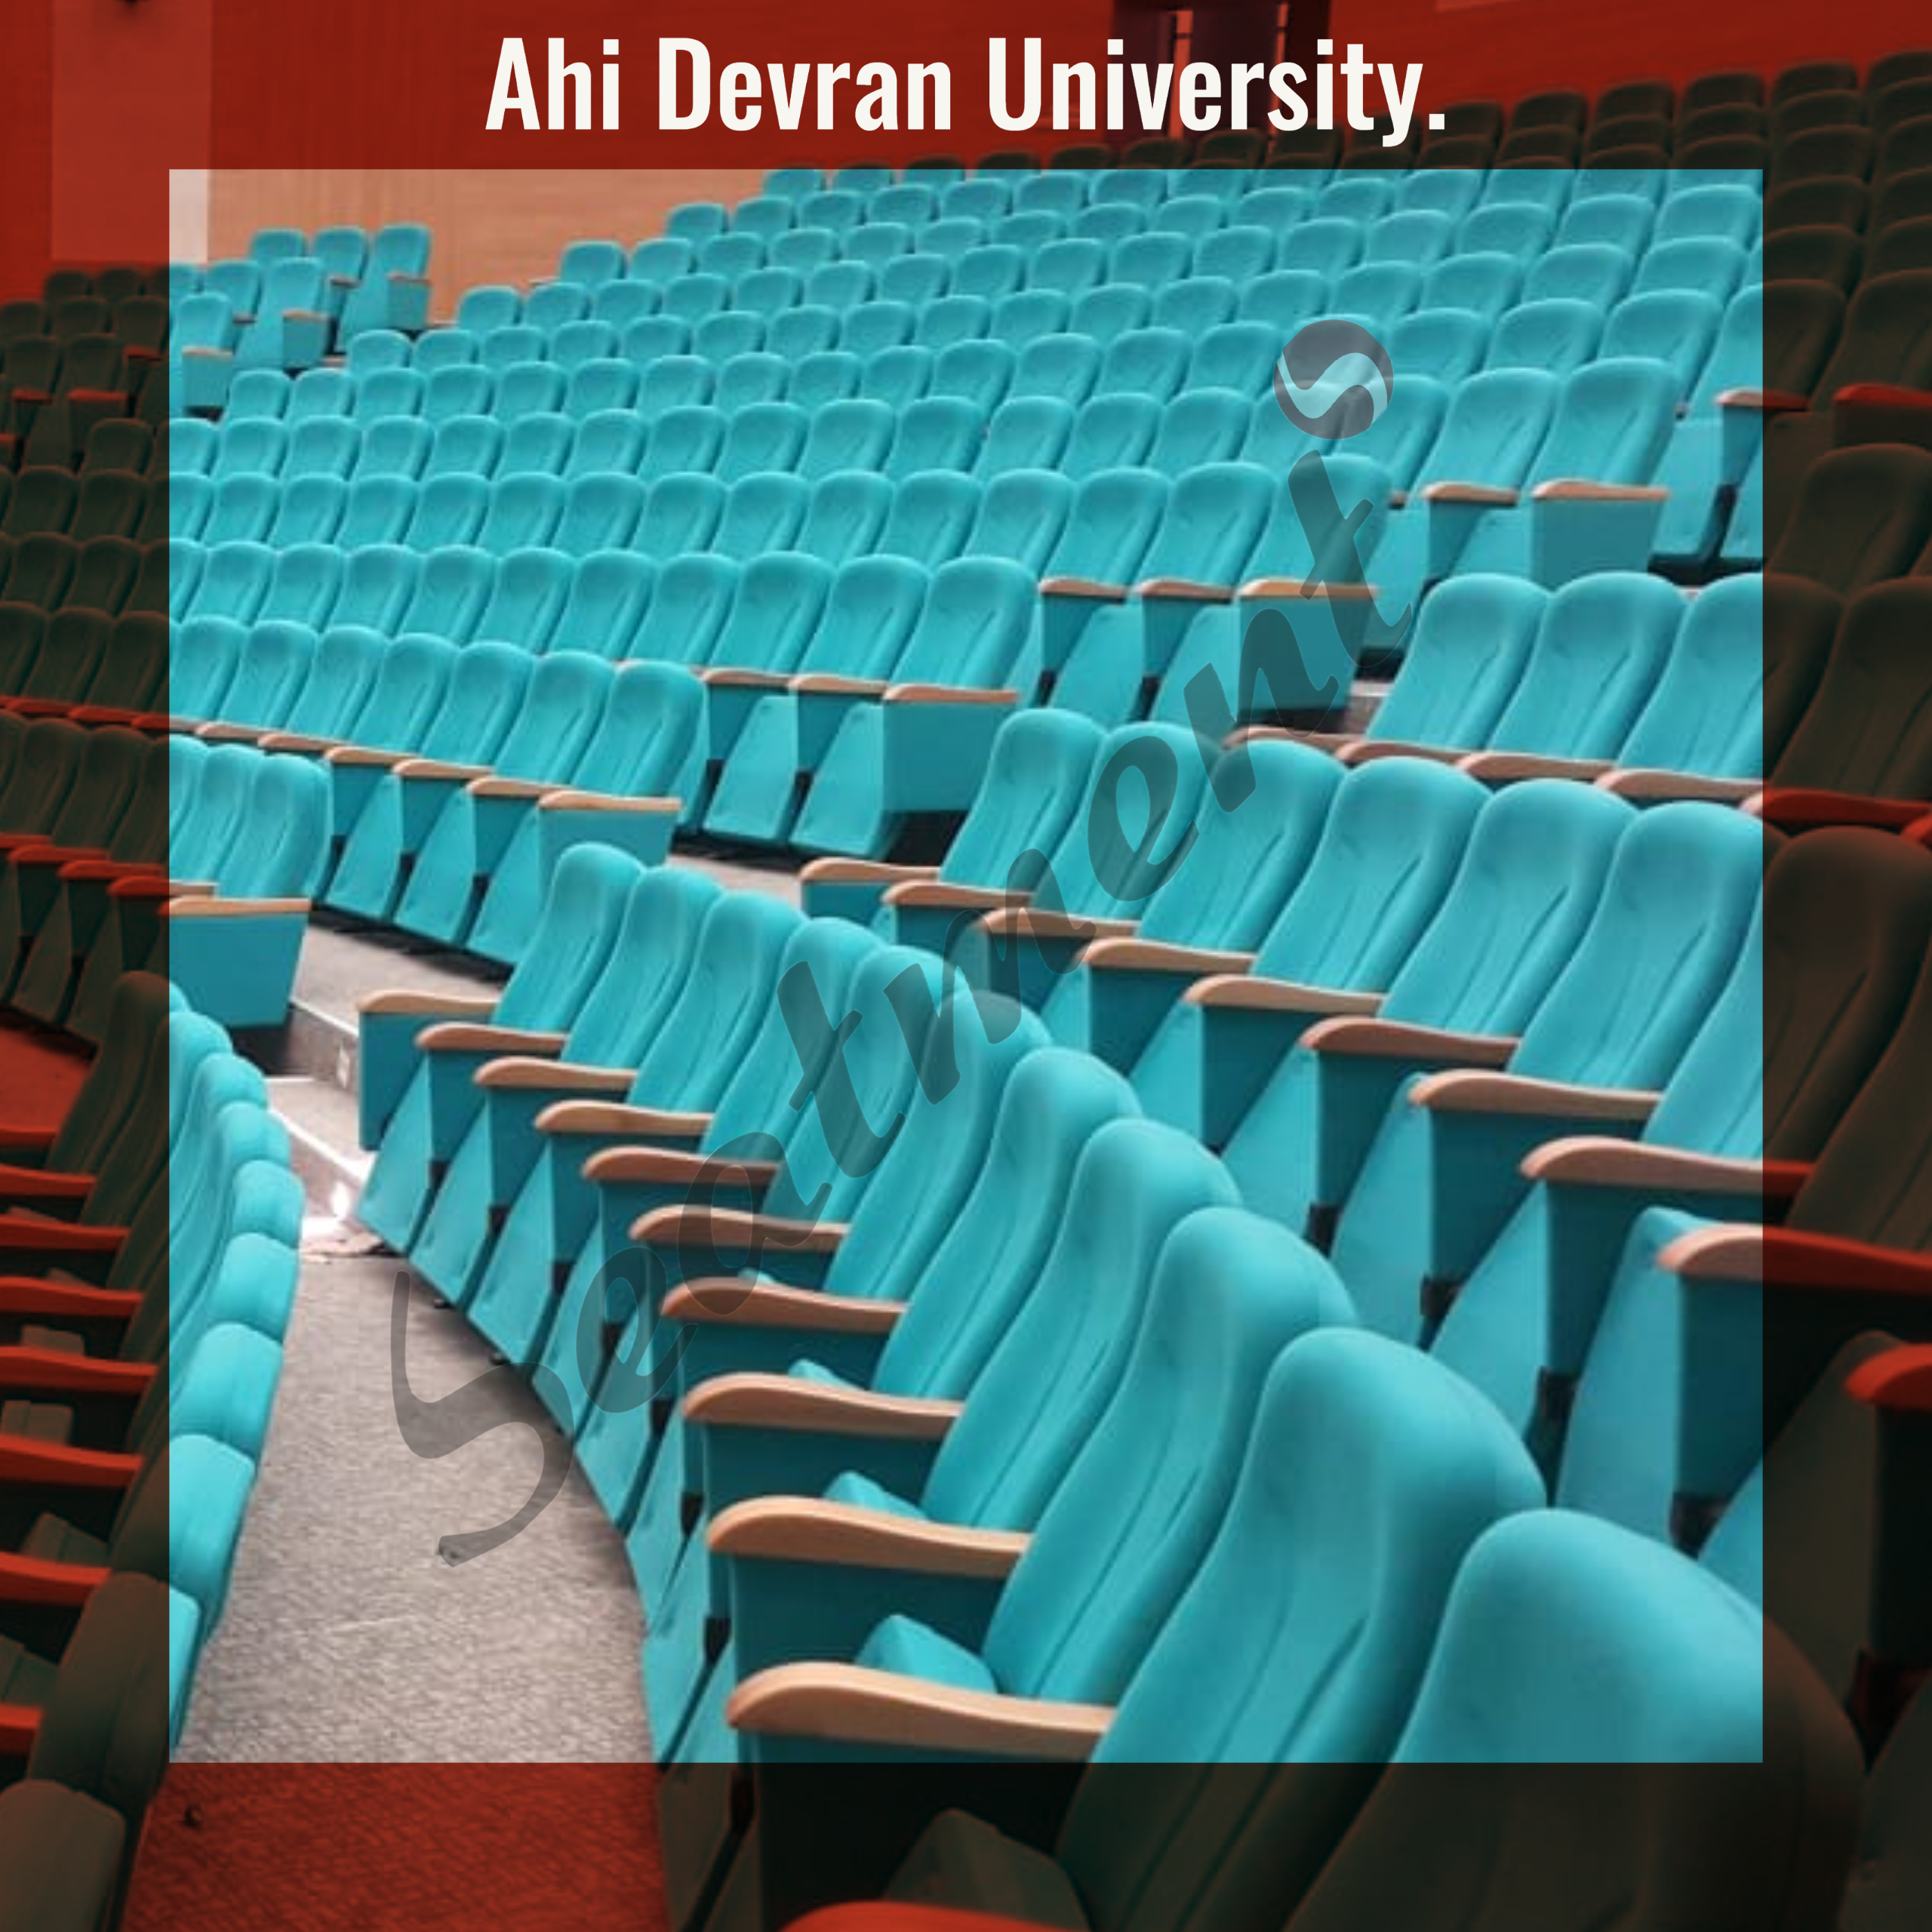 Amphitheatre seats, conference seats, lecture hall seats